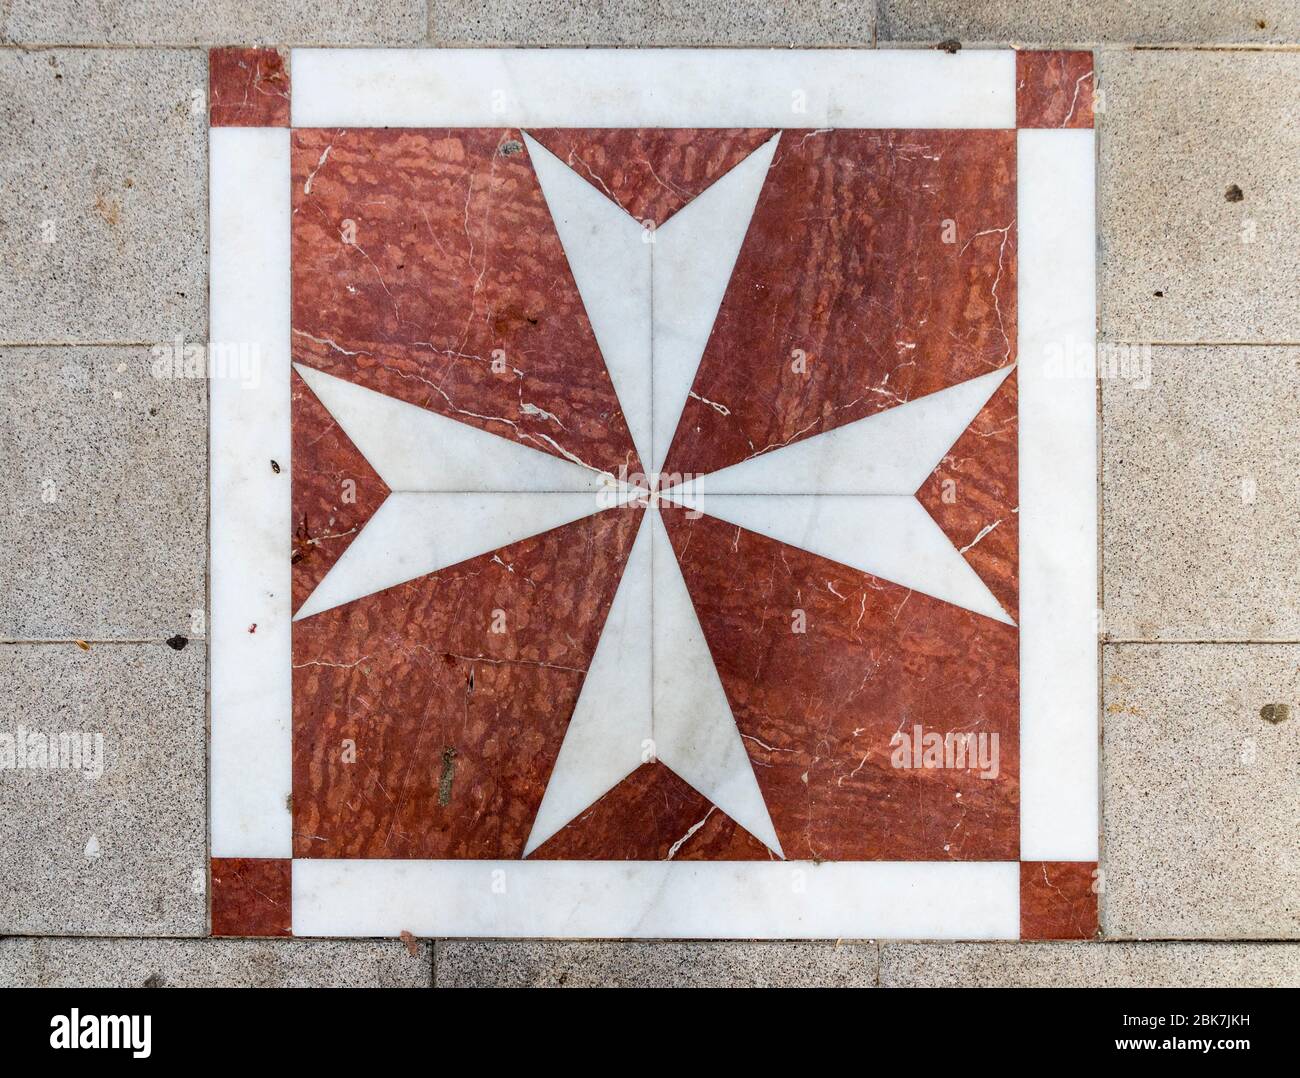 Lora del Rio, Spain. Mosaic in the floor with St John's Cross, emblem of the Sovereign Military Order of Malta, in this town in Andalucia Stock Photo